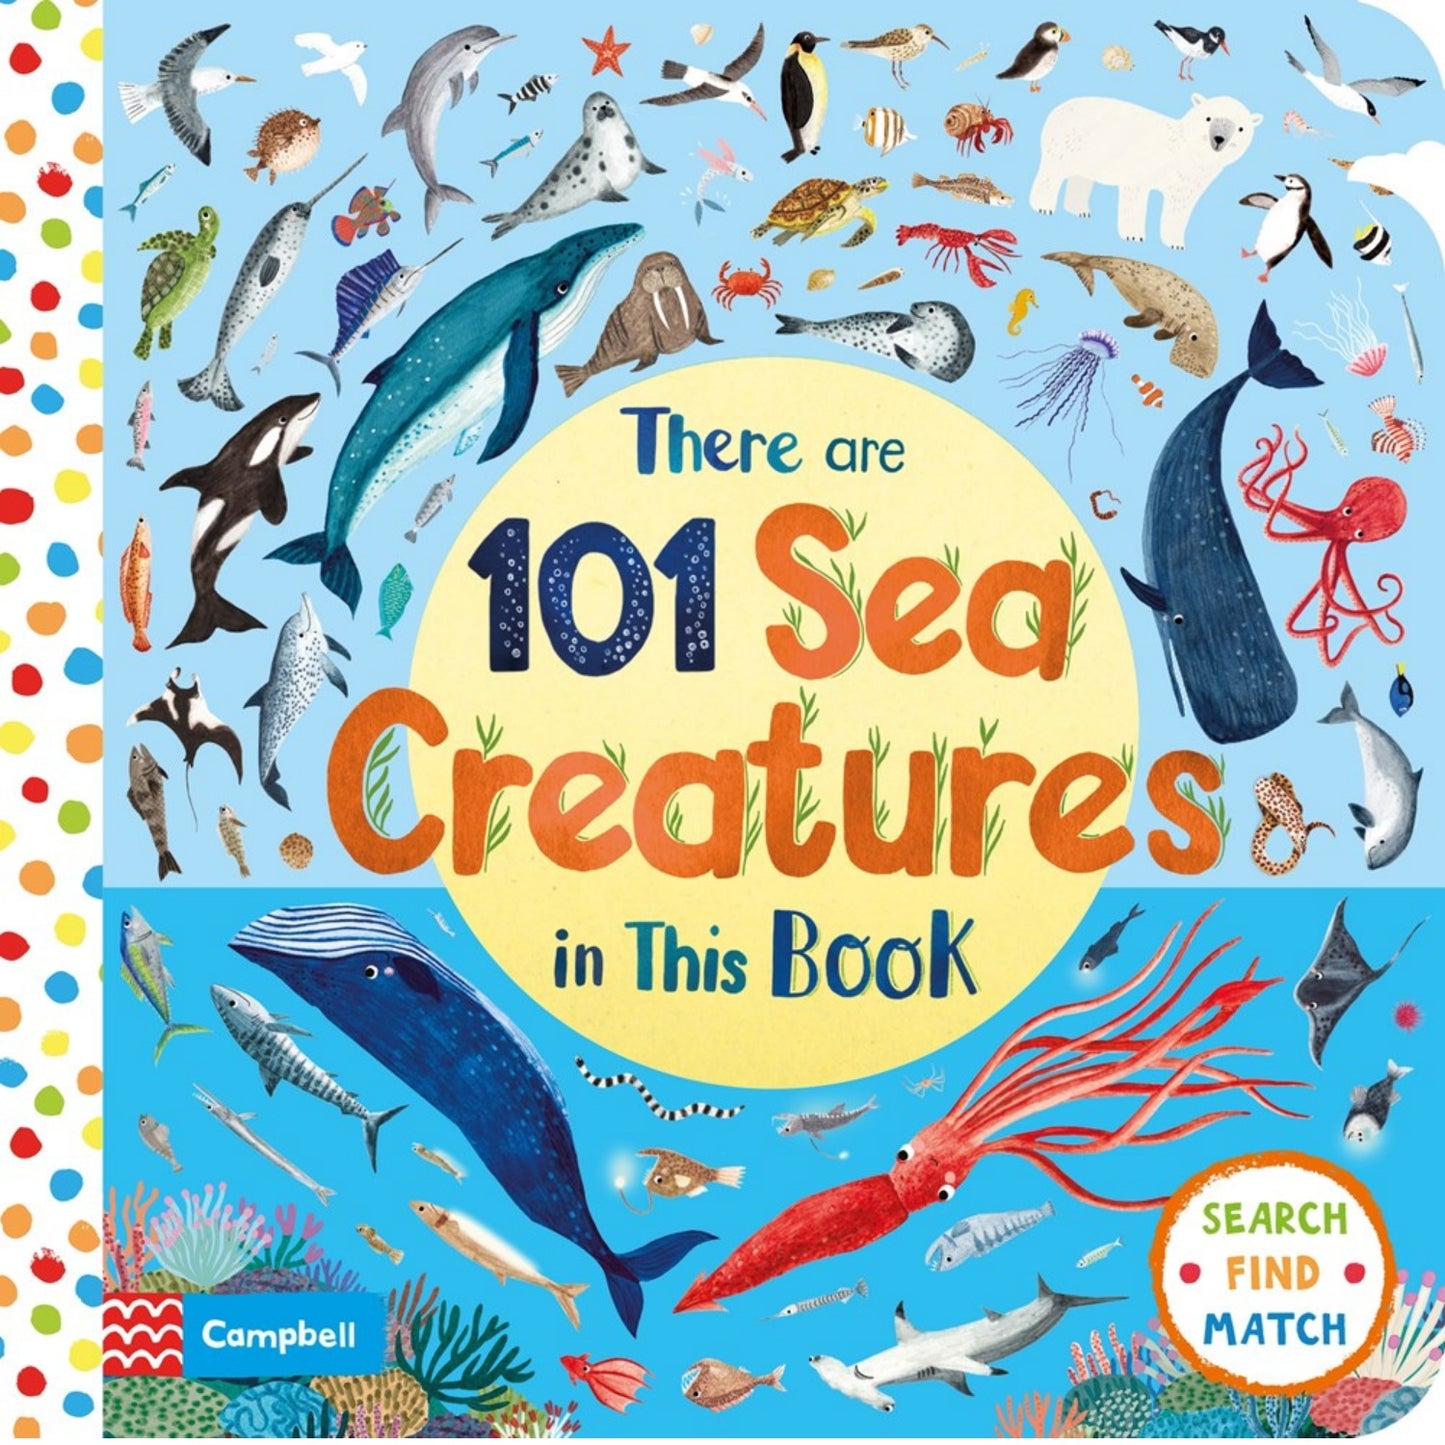 There Are 101 Sea Creatures in This Book | Children’s Board Book on Oceans & Seas